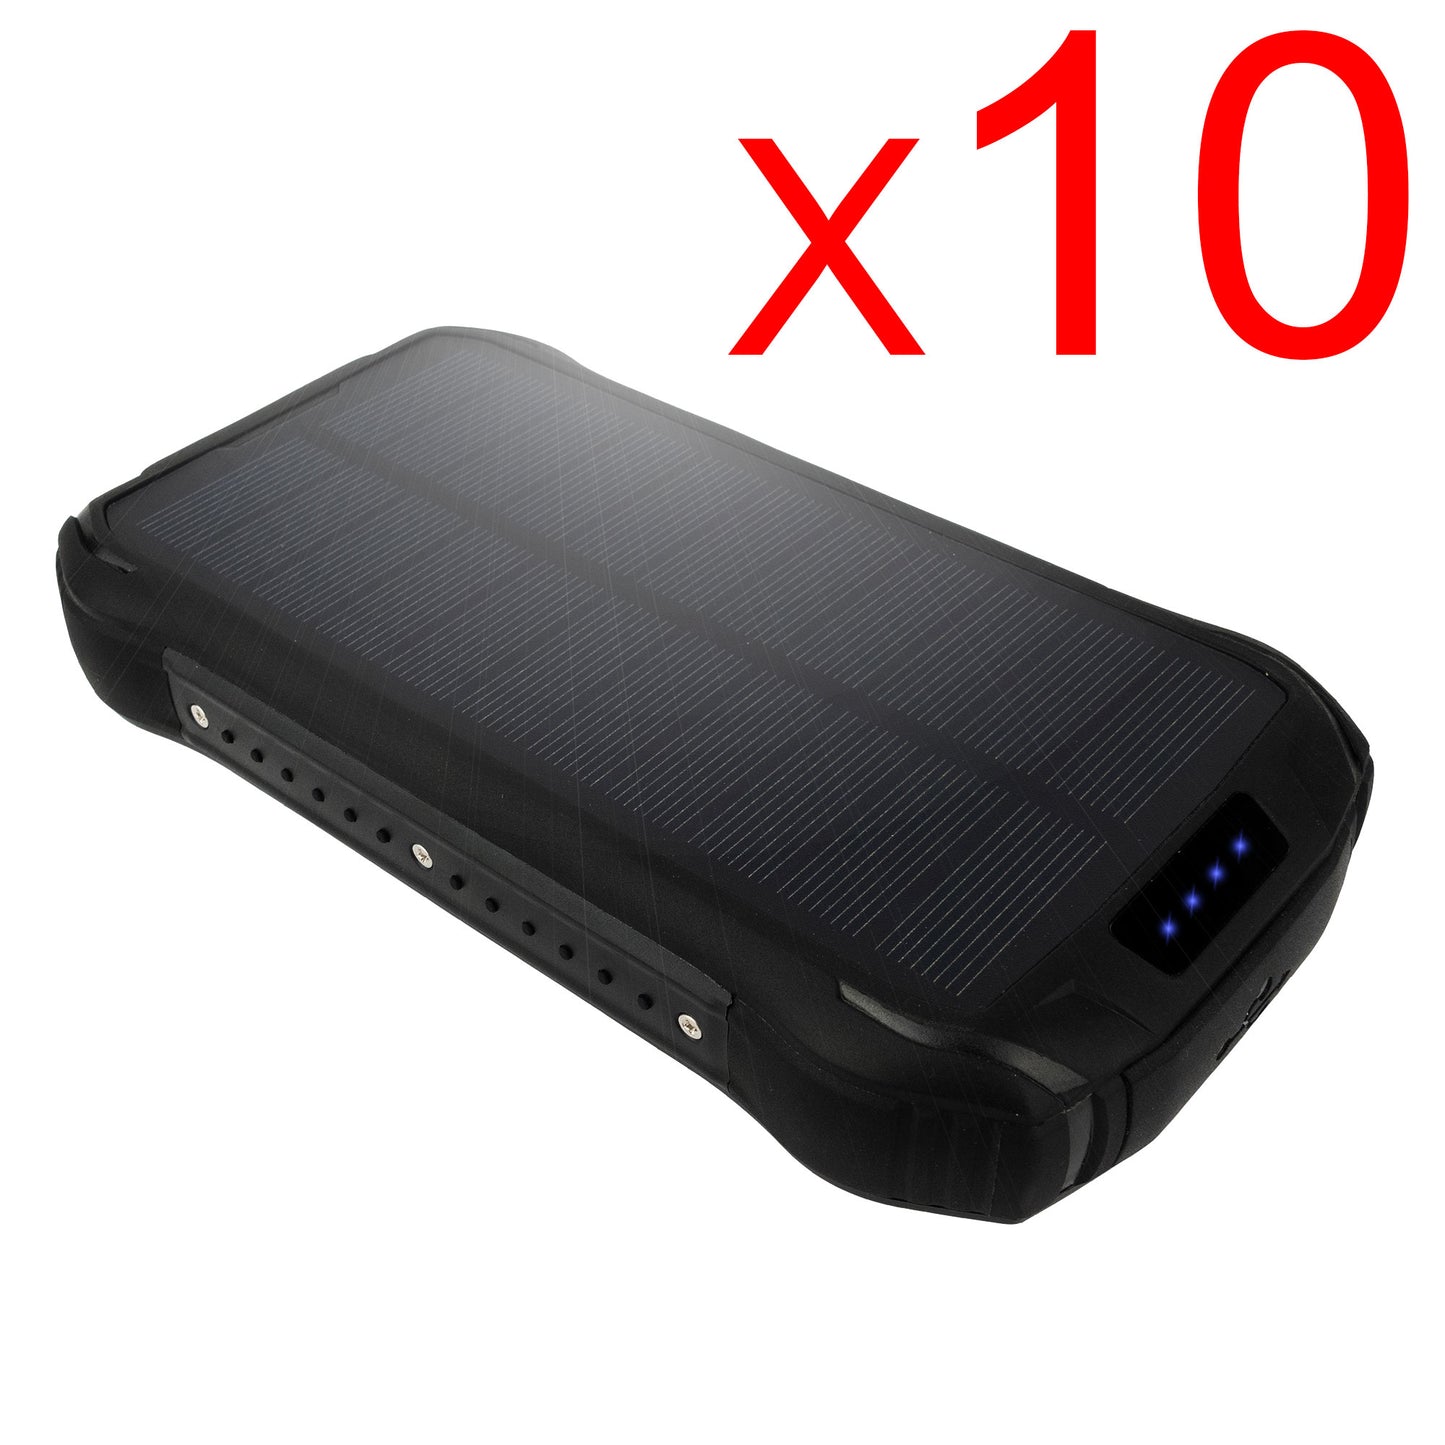 [ Bulk Pack of 10 ] Tough Light i26W USB Solar Power Bank Charger - 26,800 mAh Li Polymer - 2 AMP High Speed Cable Included